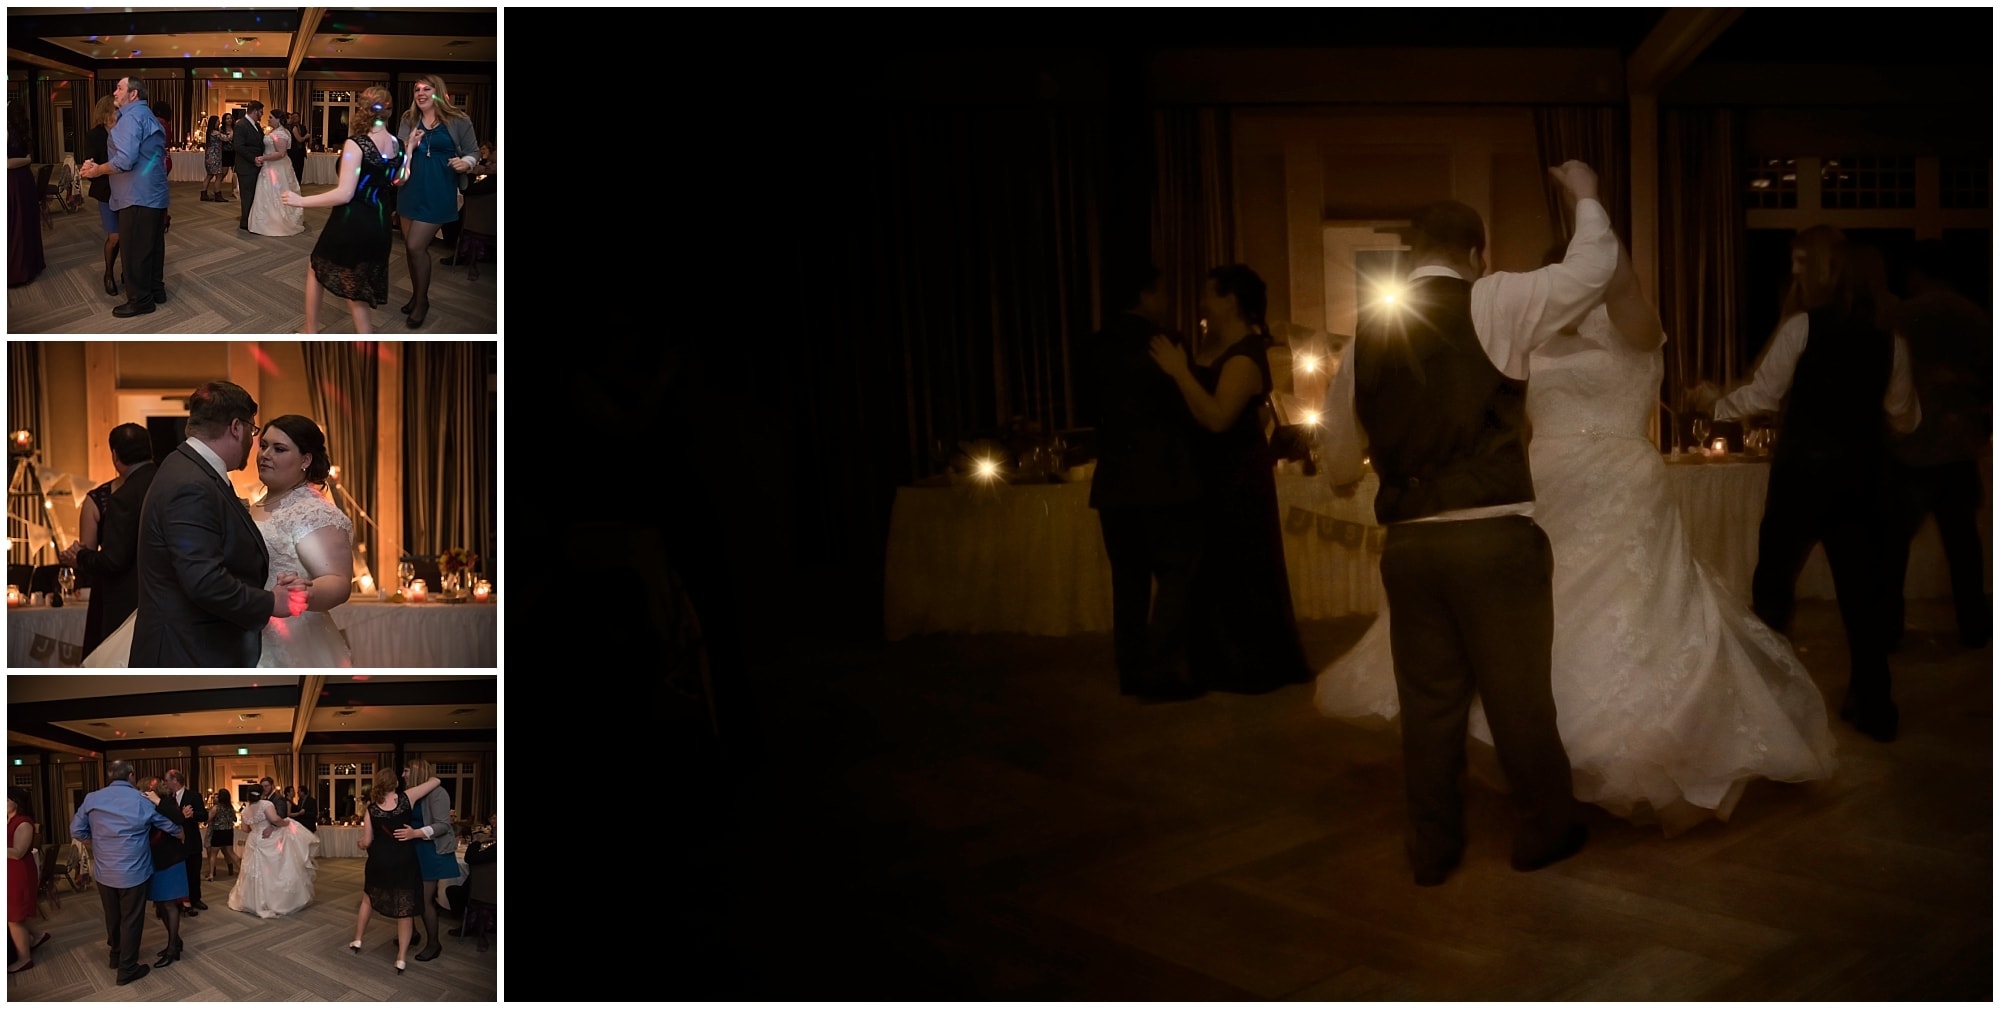 The bride and groom dance with their guests during their wedding reception at White Point.